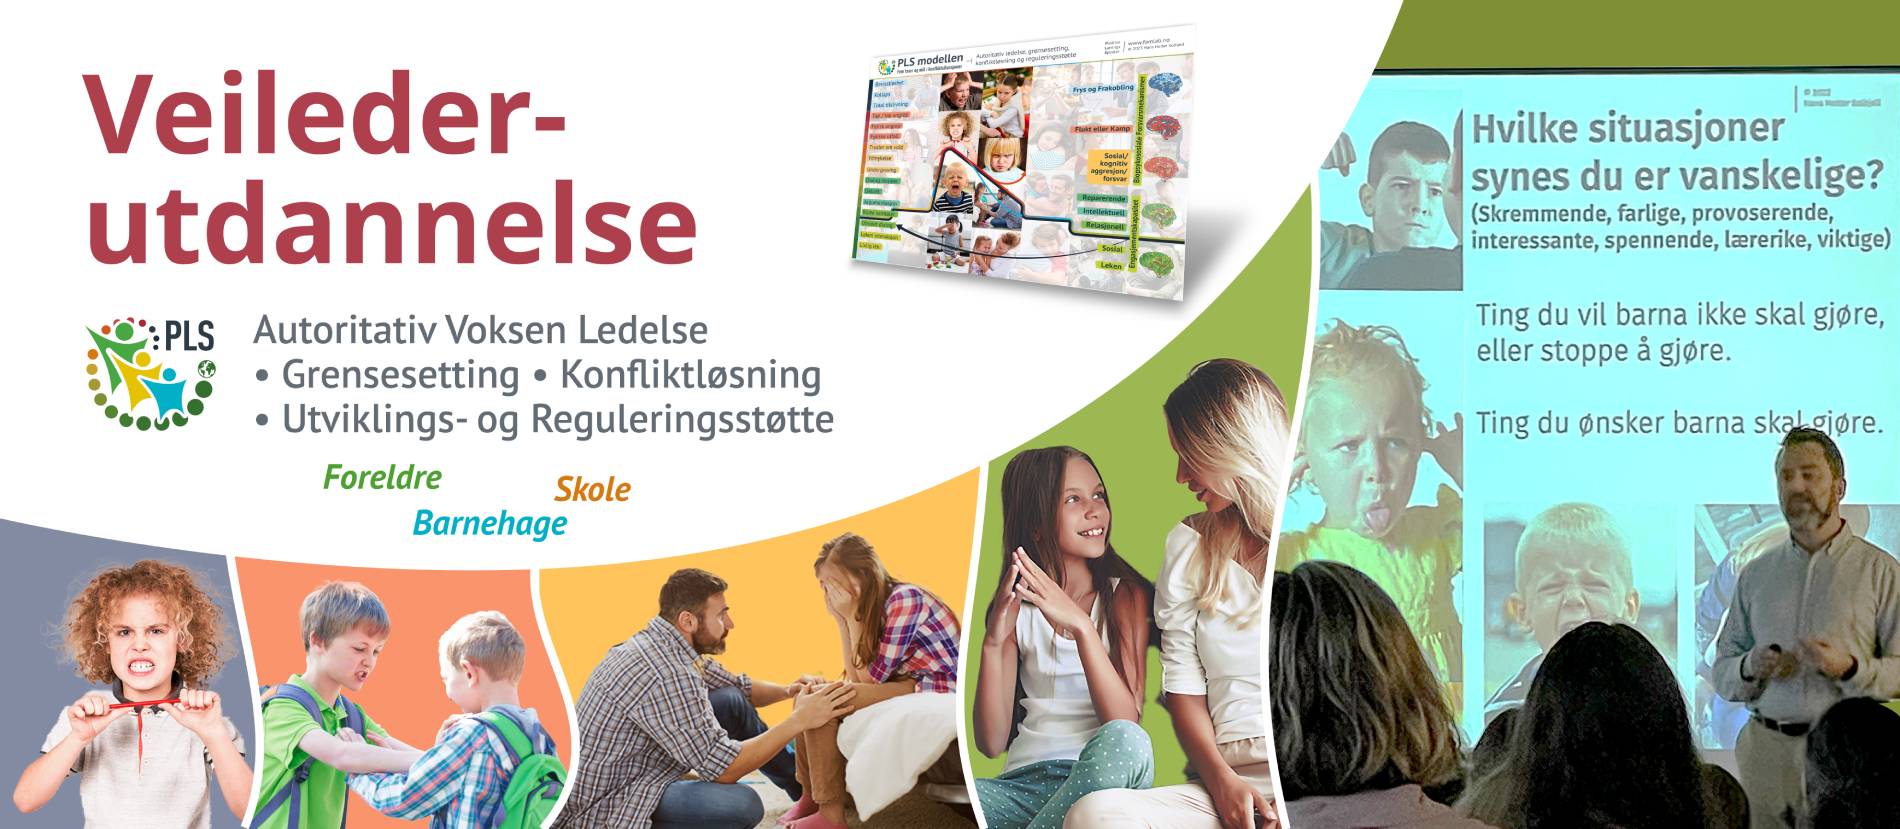 A collage for 'Veileder Utdannelse' program showing various educational and emotional support activities for parents and schools.